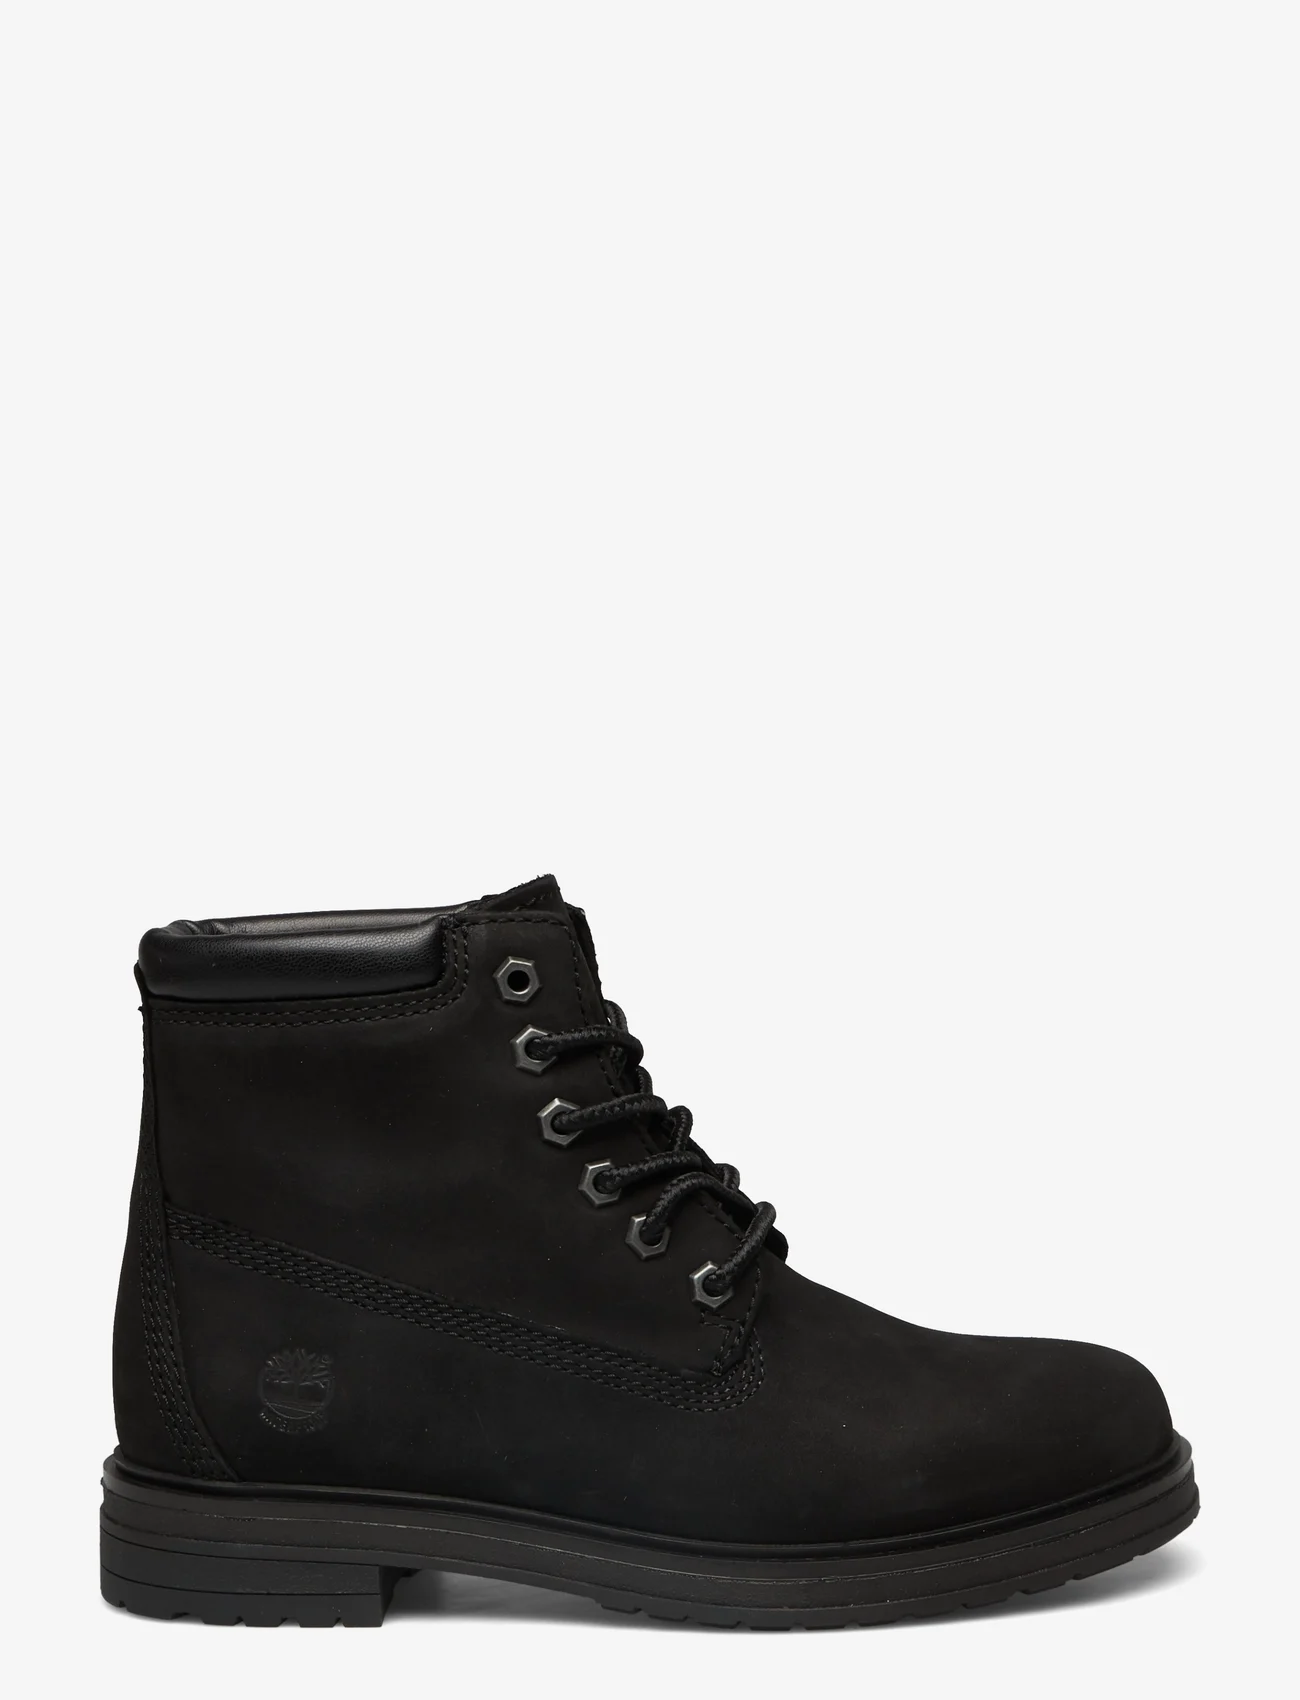 Timberland - Hannover Hill 6in Boot WP - kängor - black - 1